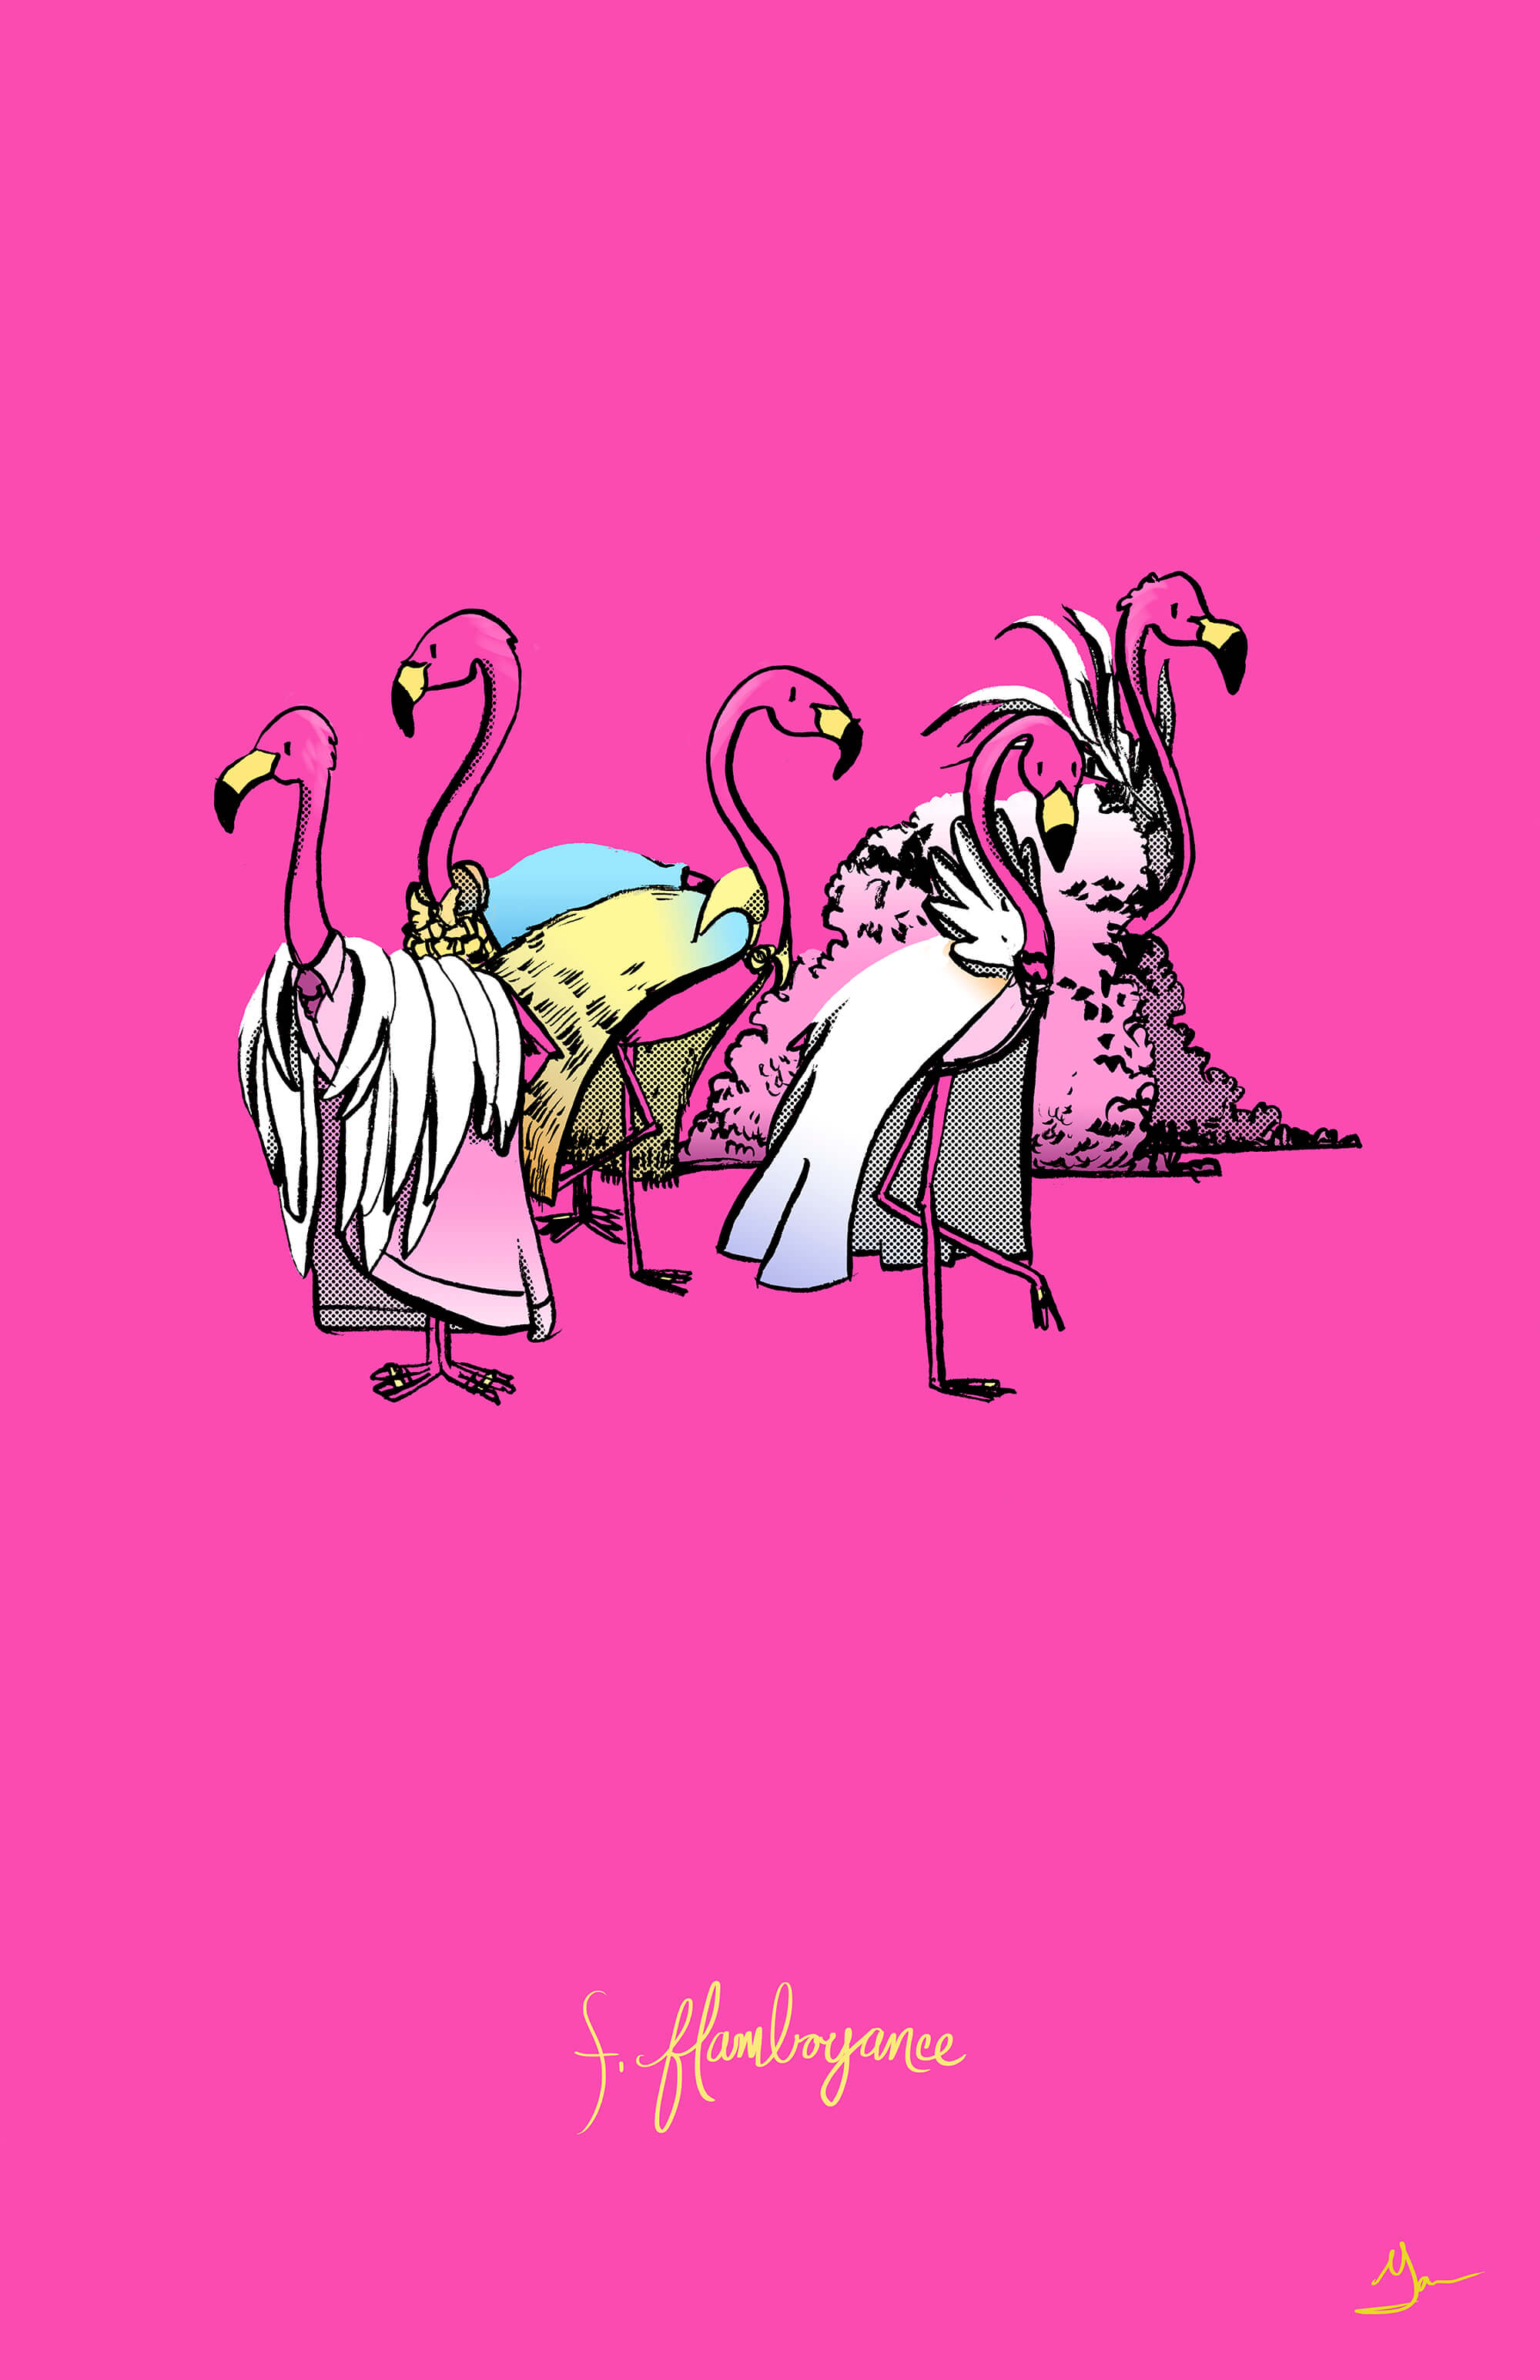 A group of flamingos are wearing bright capes and sunglasses.